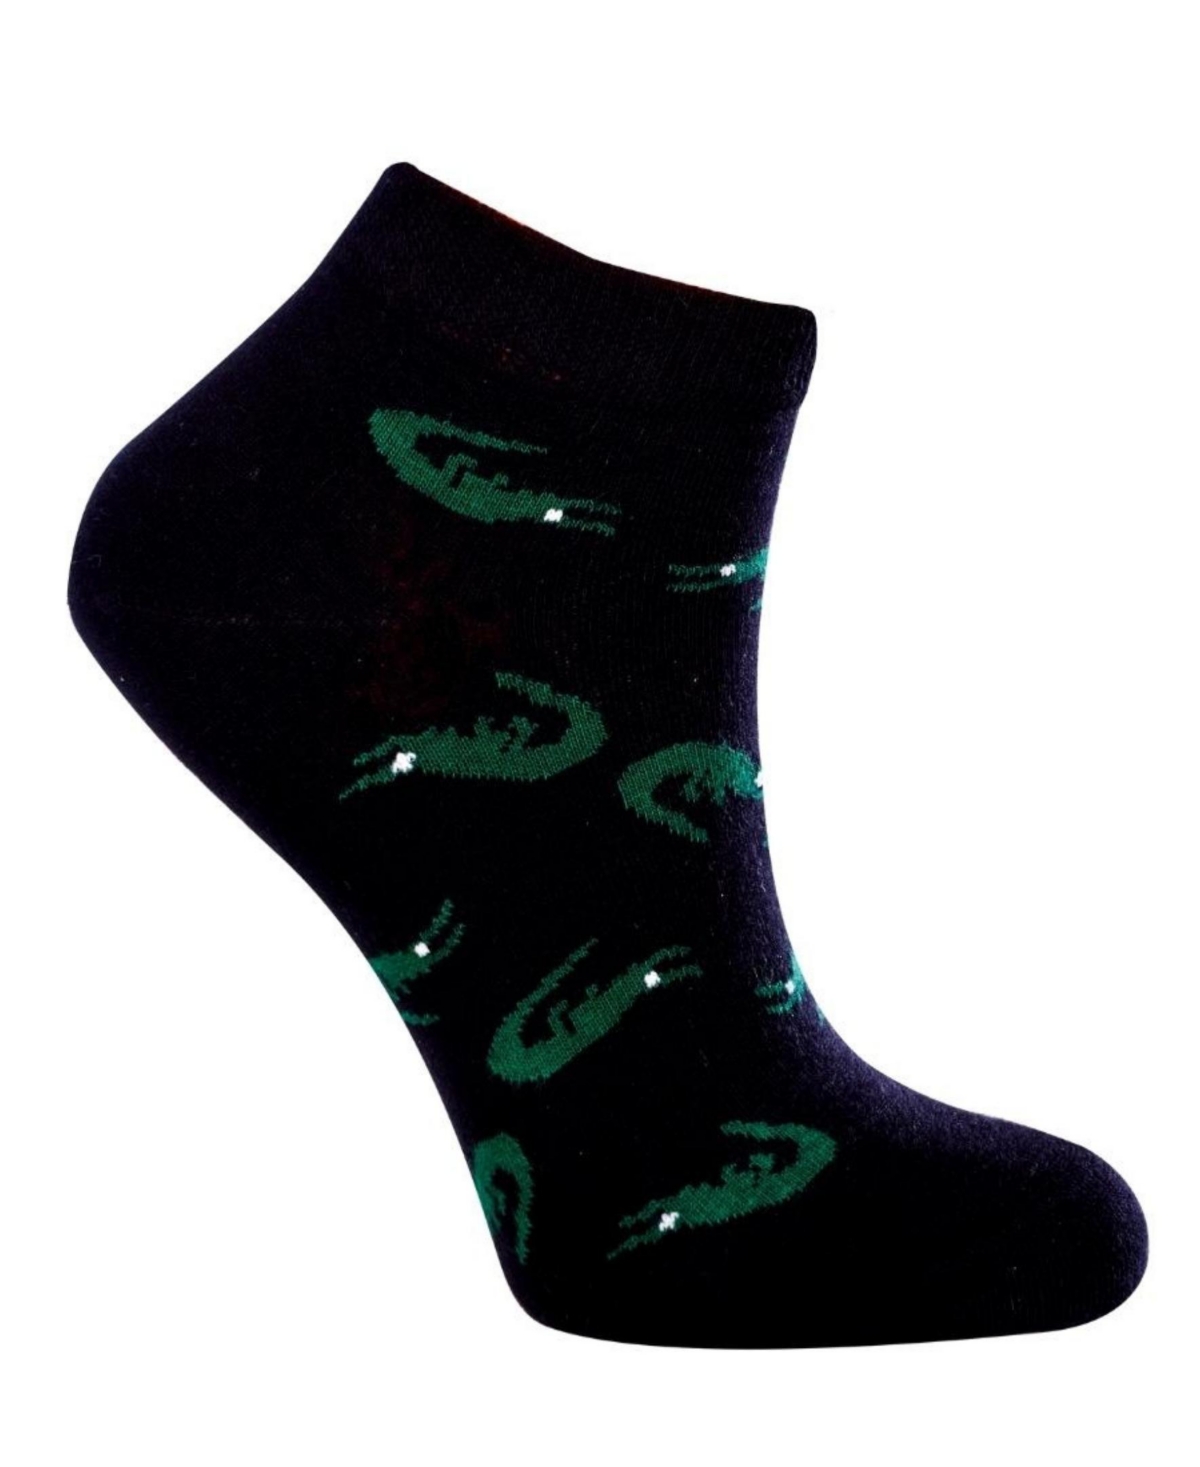 Women's Alligator W-Cotton Novelty Ankle Socks with Seamless Toe, Pack of 1 - Black